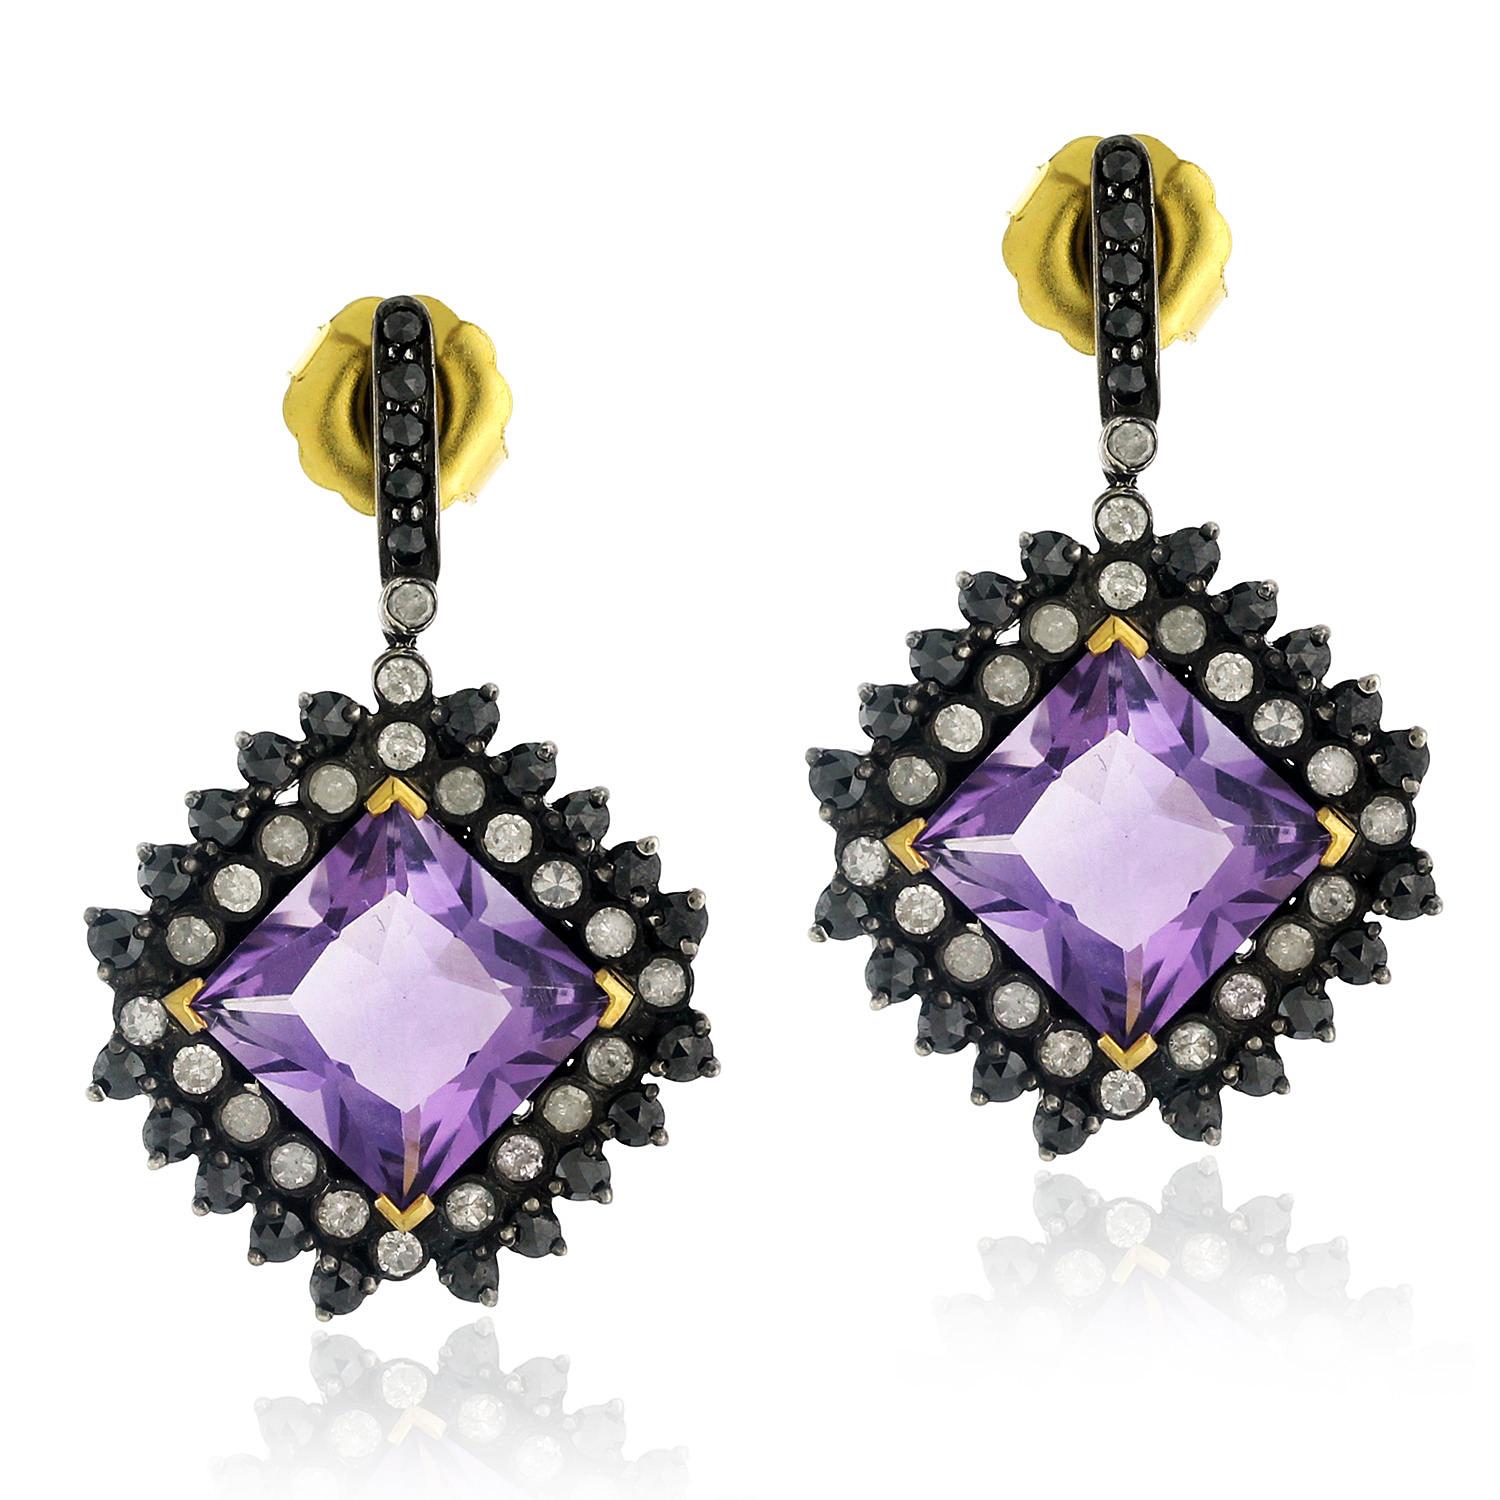 Modern 15.25cts Amethyst Drop Earring with Black and White Diamond in Silver and Gold For Sale